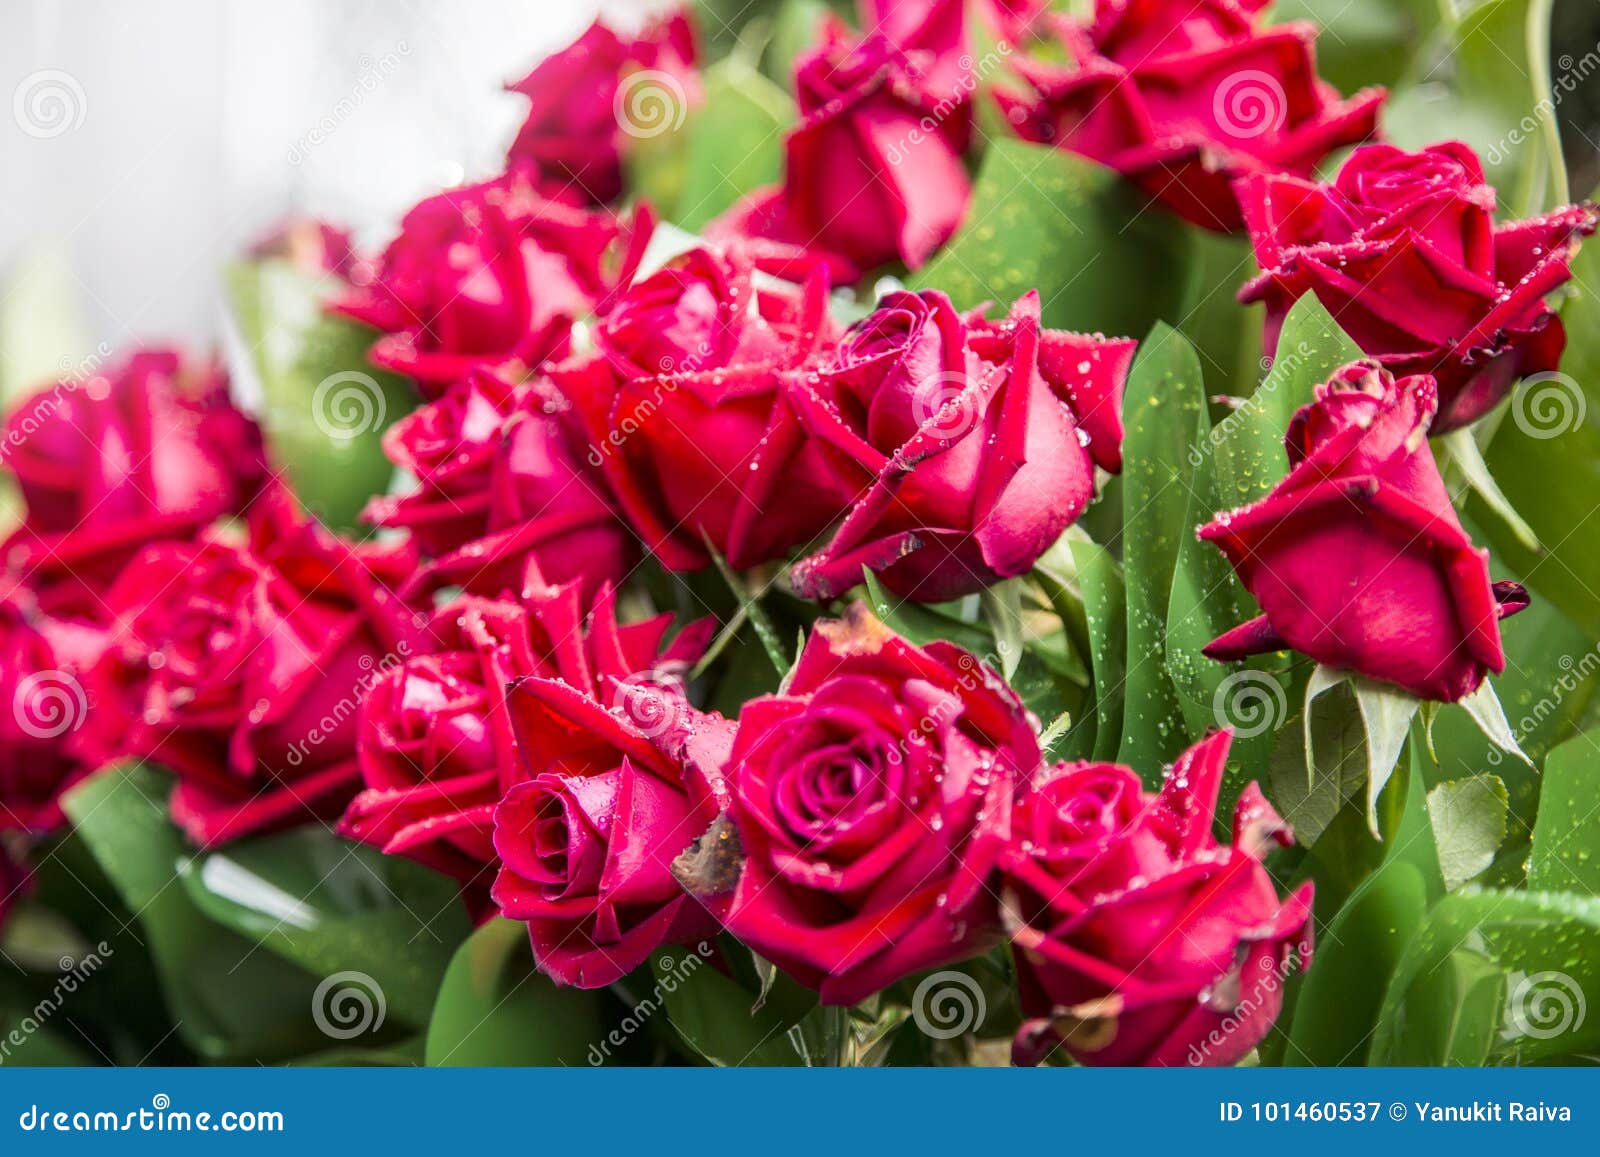 Real Red Rose Flower and Green Plastic Stock Image - Image of decoration,  love: 101460537